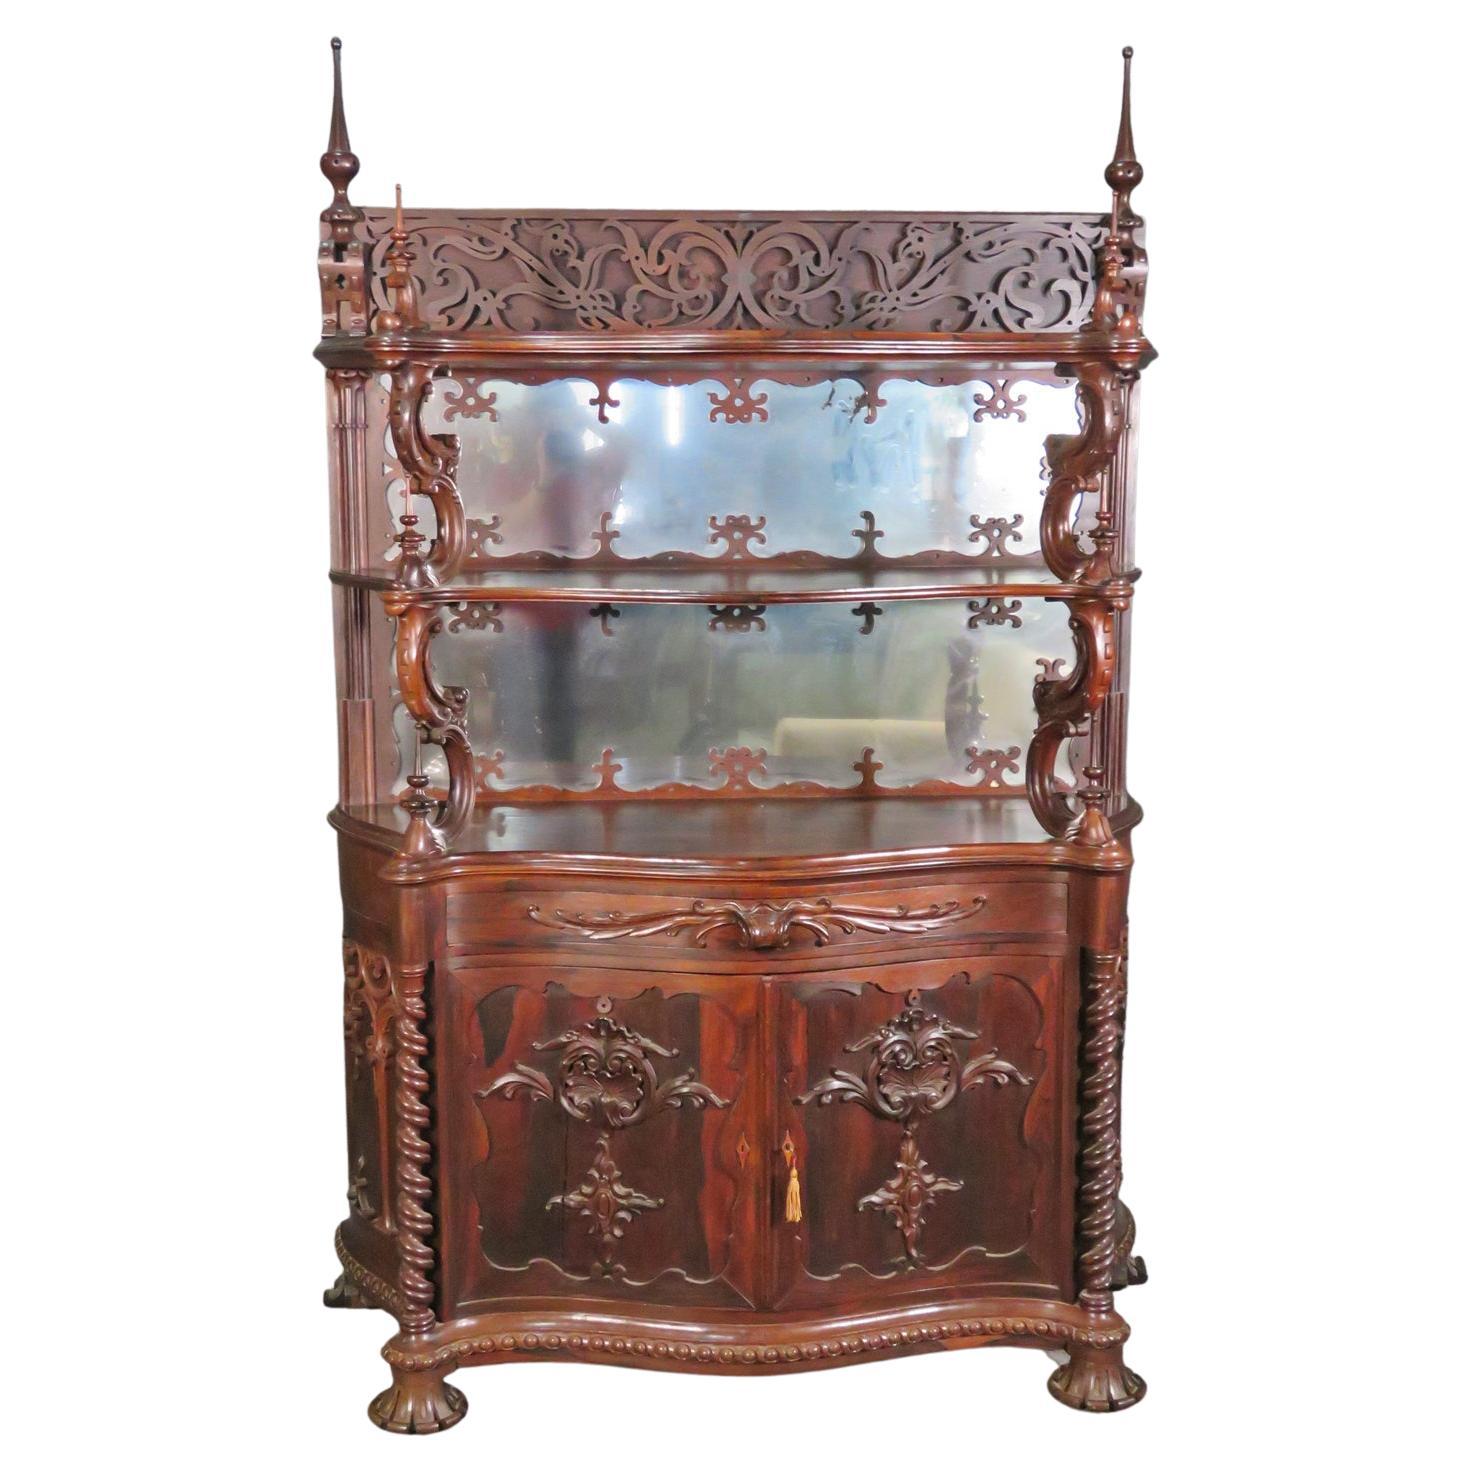 Rare Rosewood American Victorian Etagere Attributed to Alexander Roux C1860s